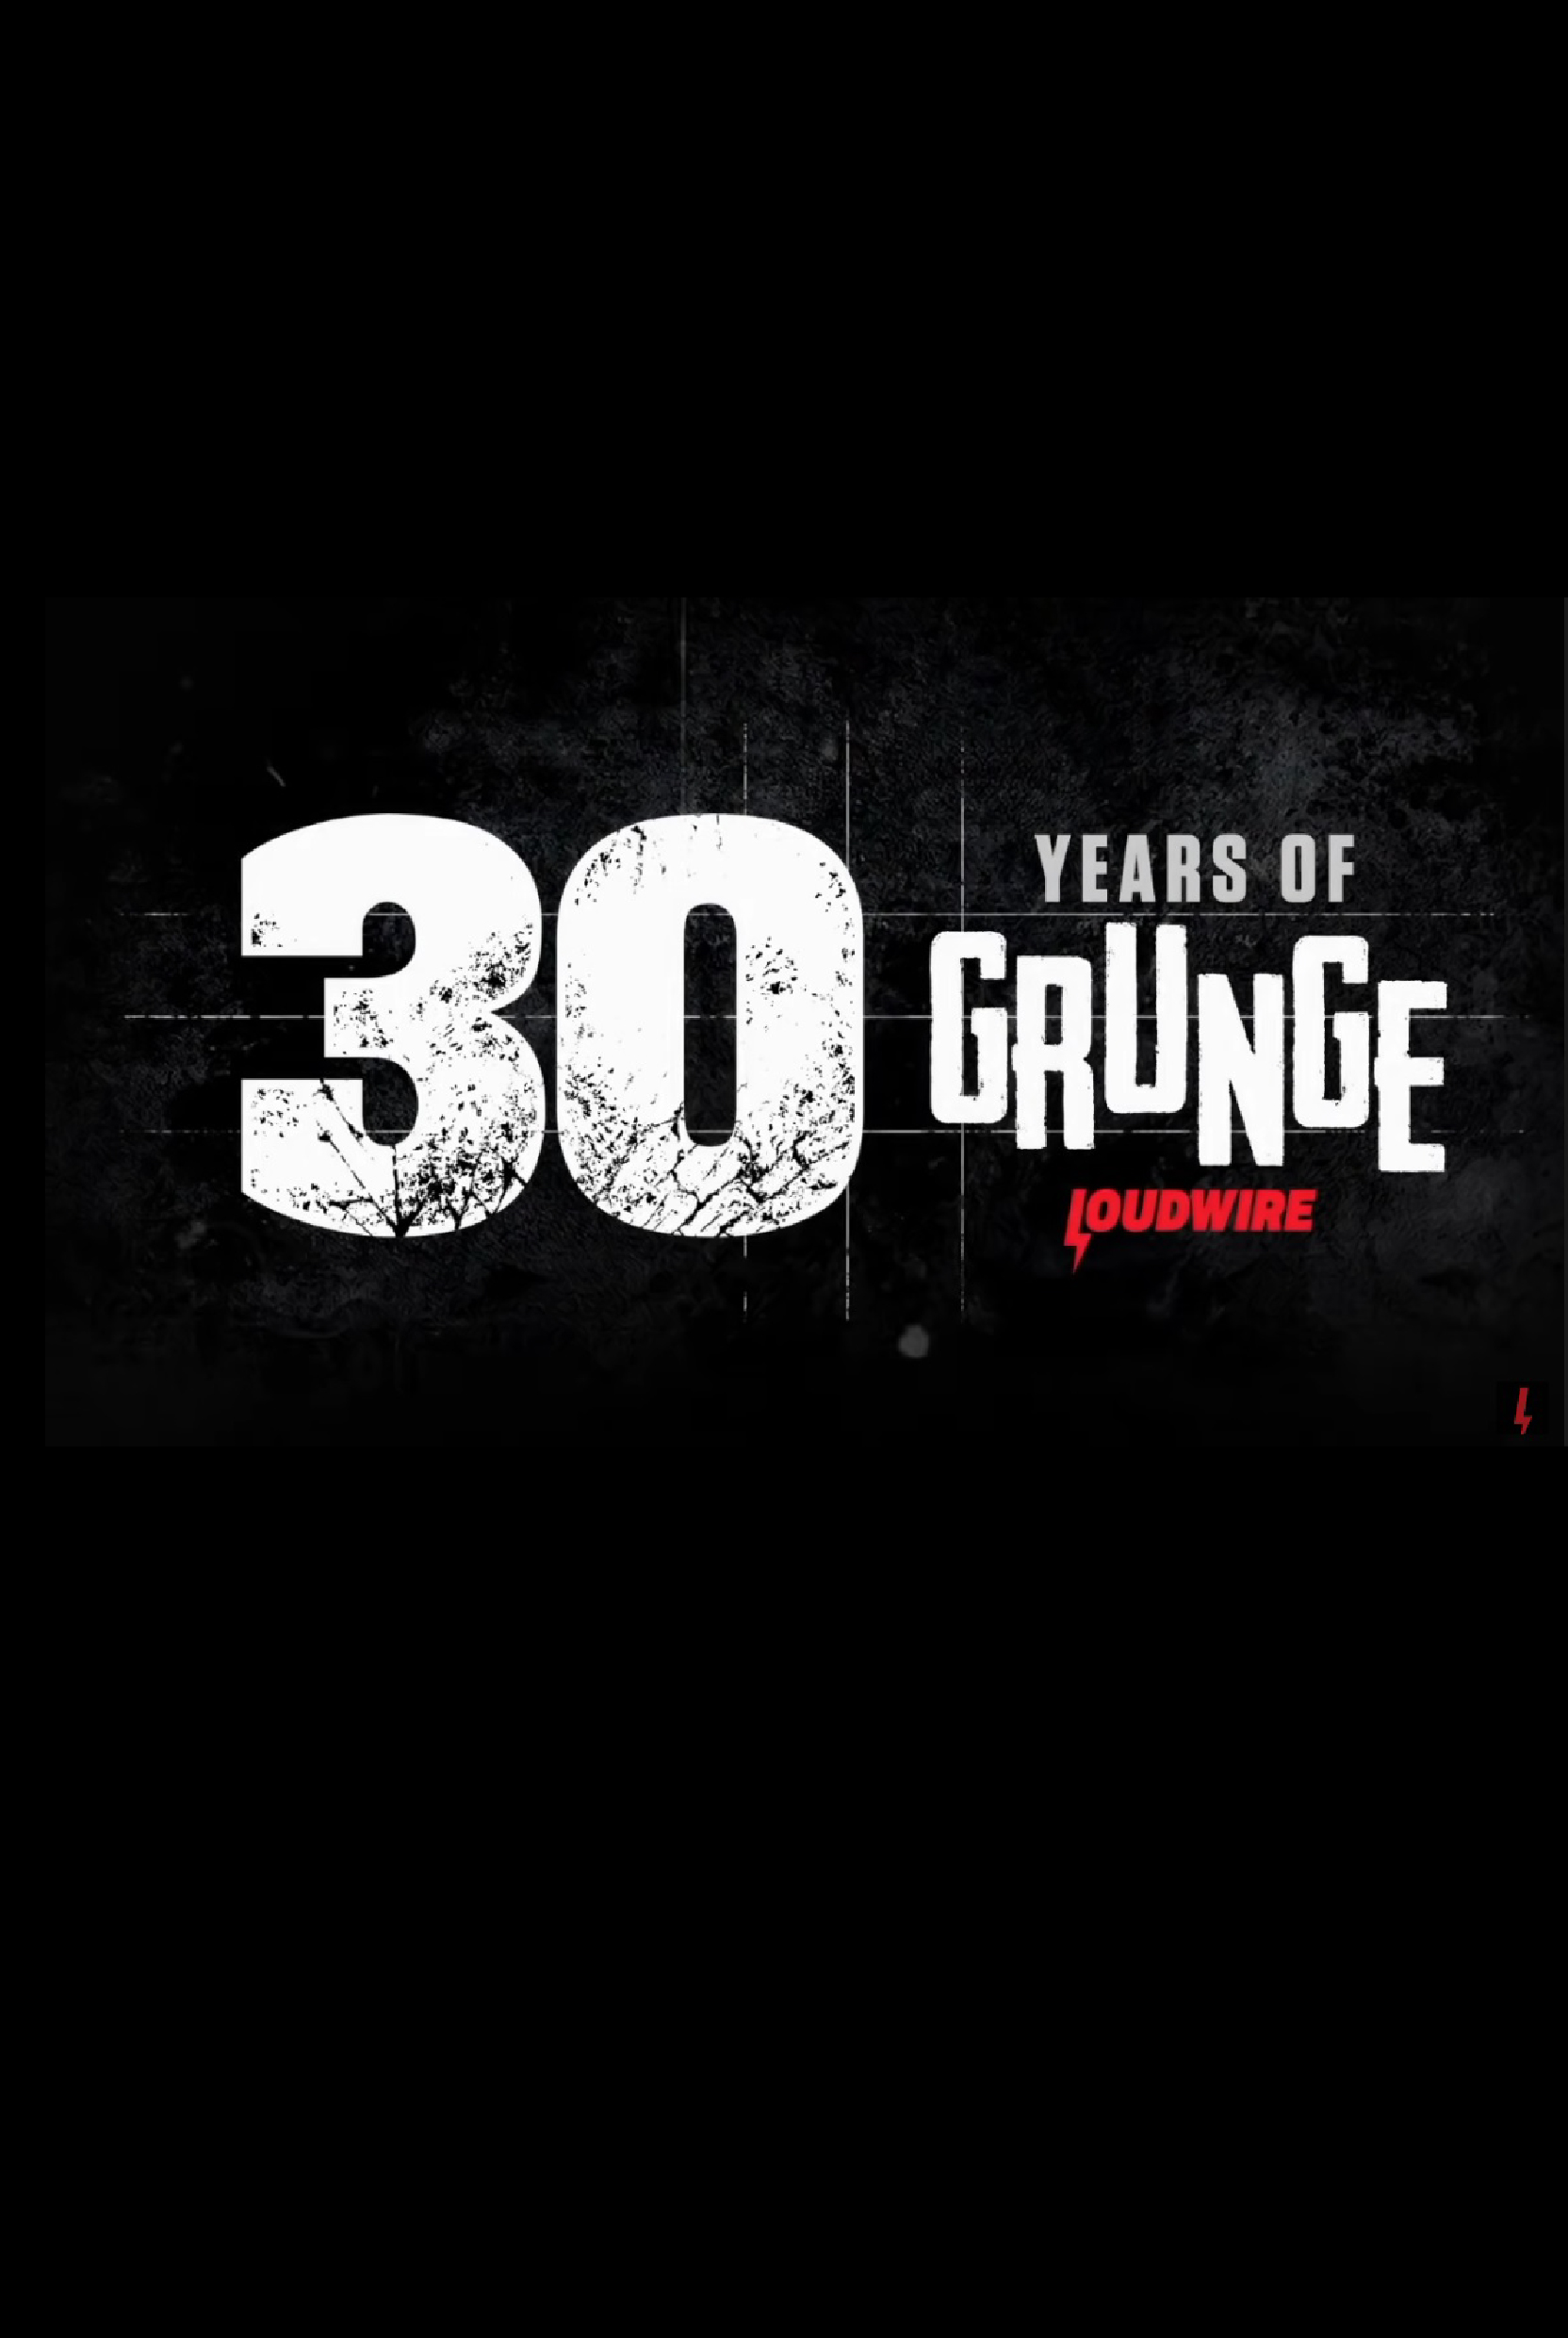 Loudwire: 30 Years of Grunge